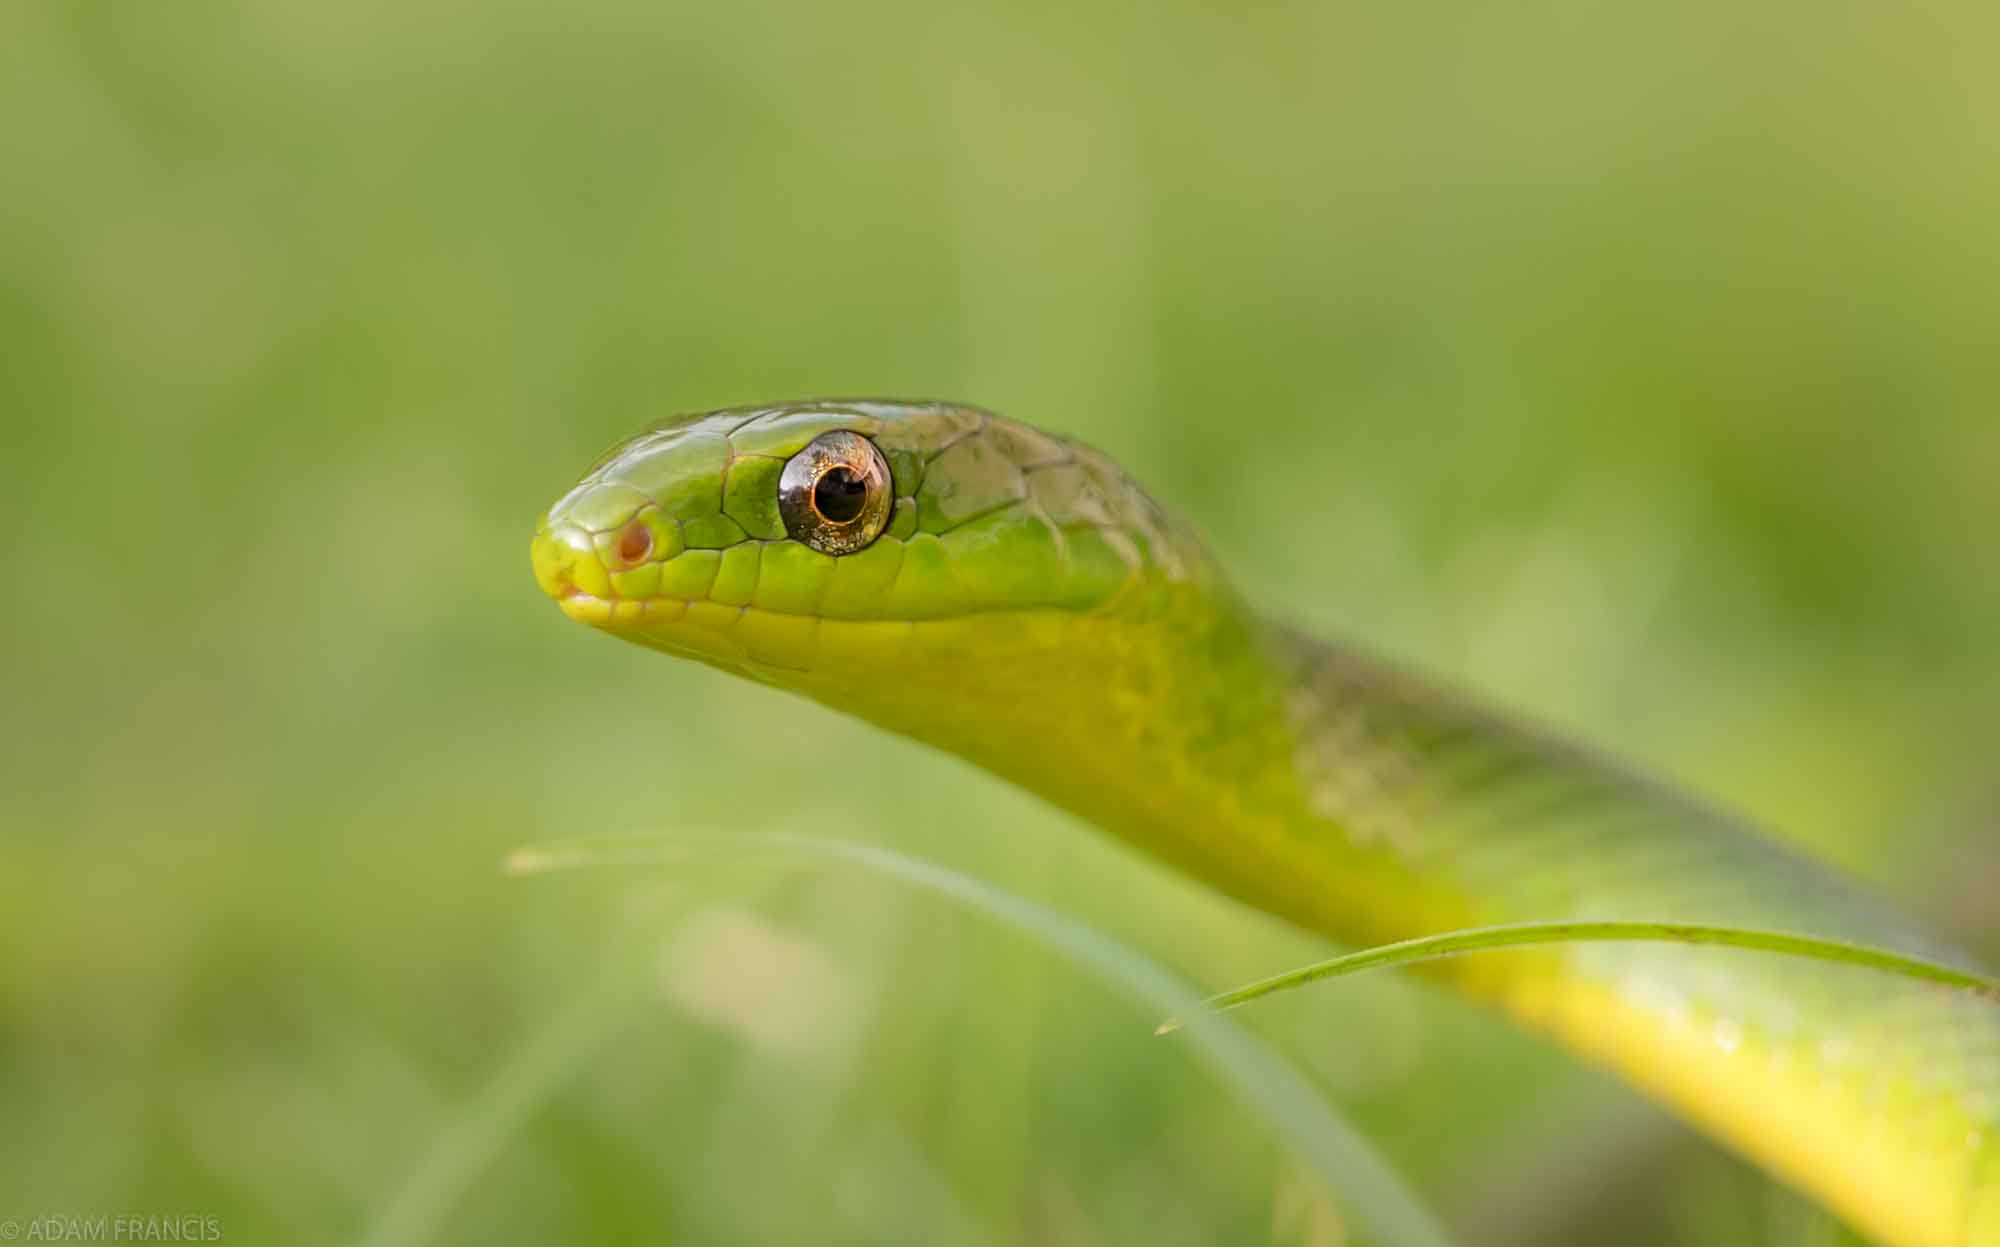 Greater Green Snake - Cyclophiops major